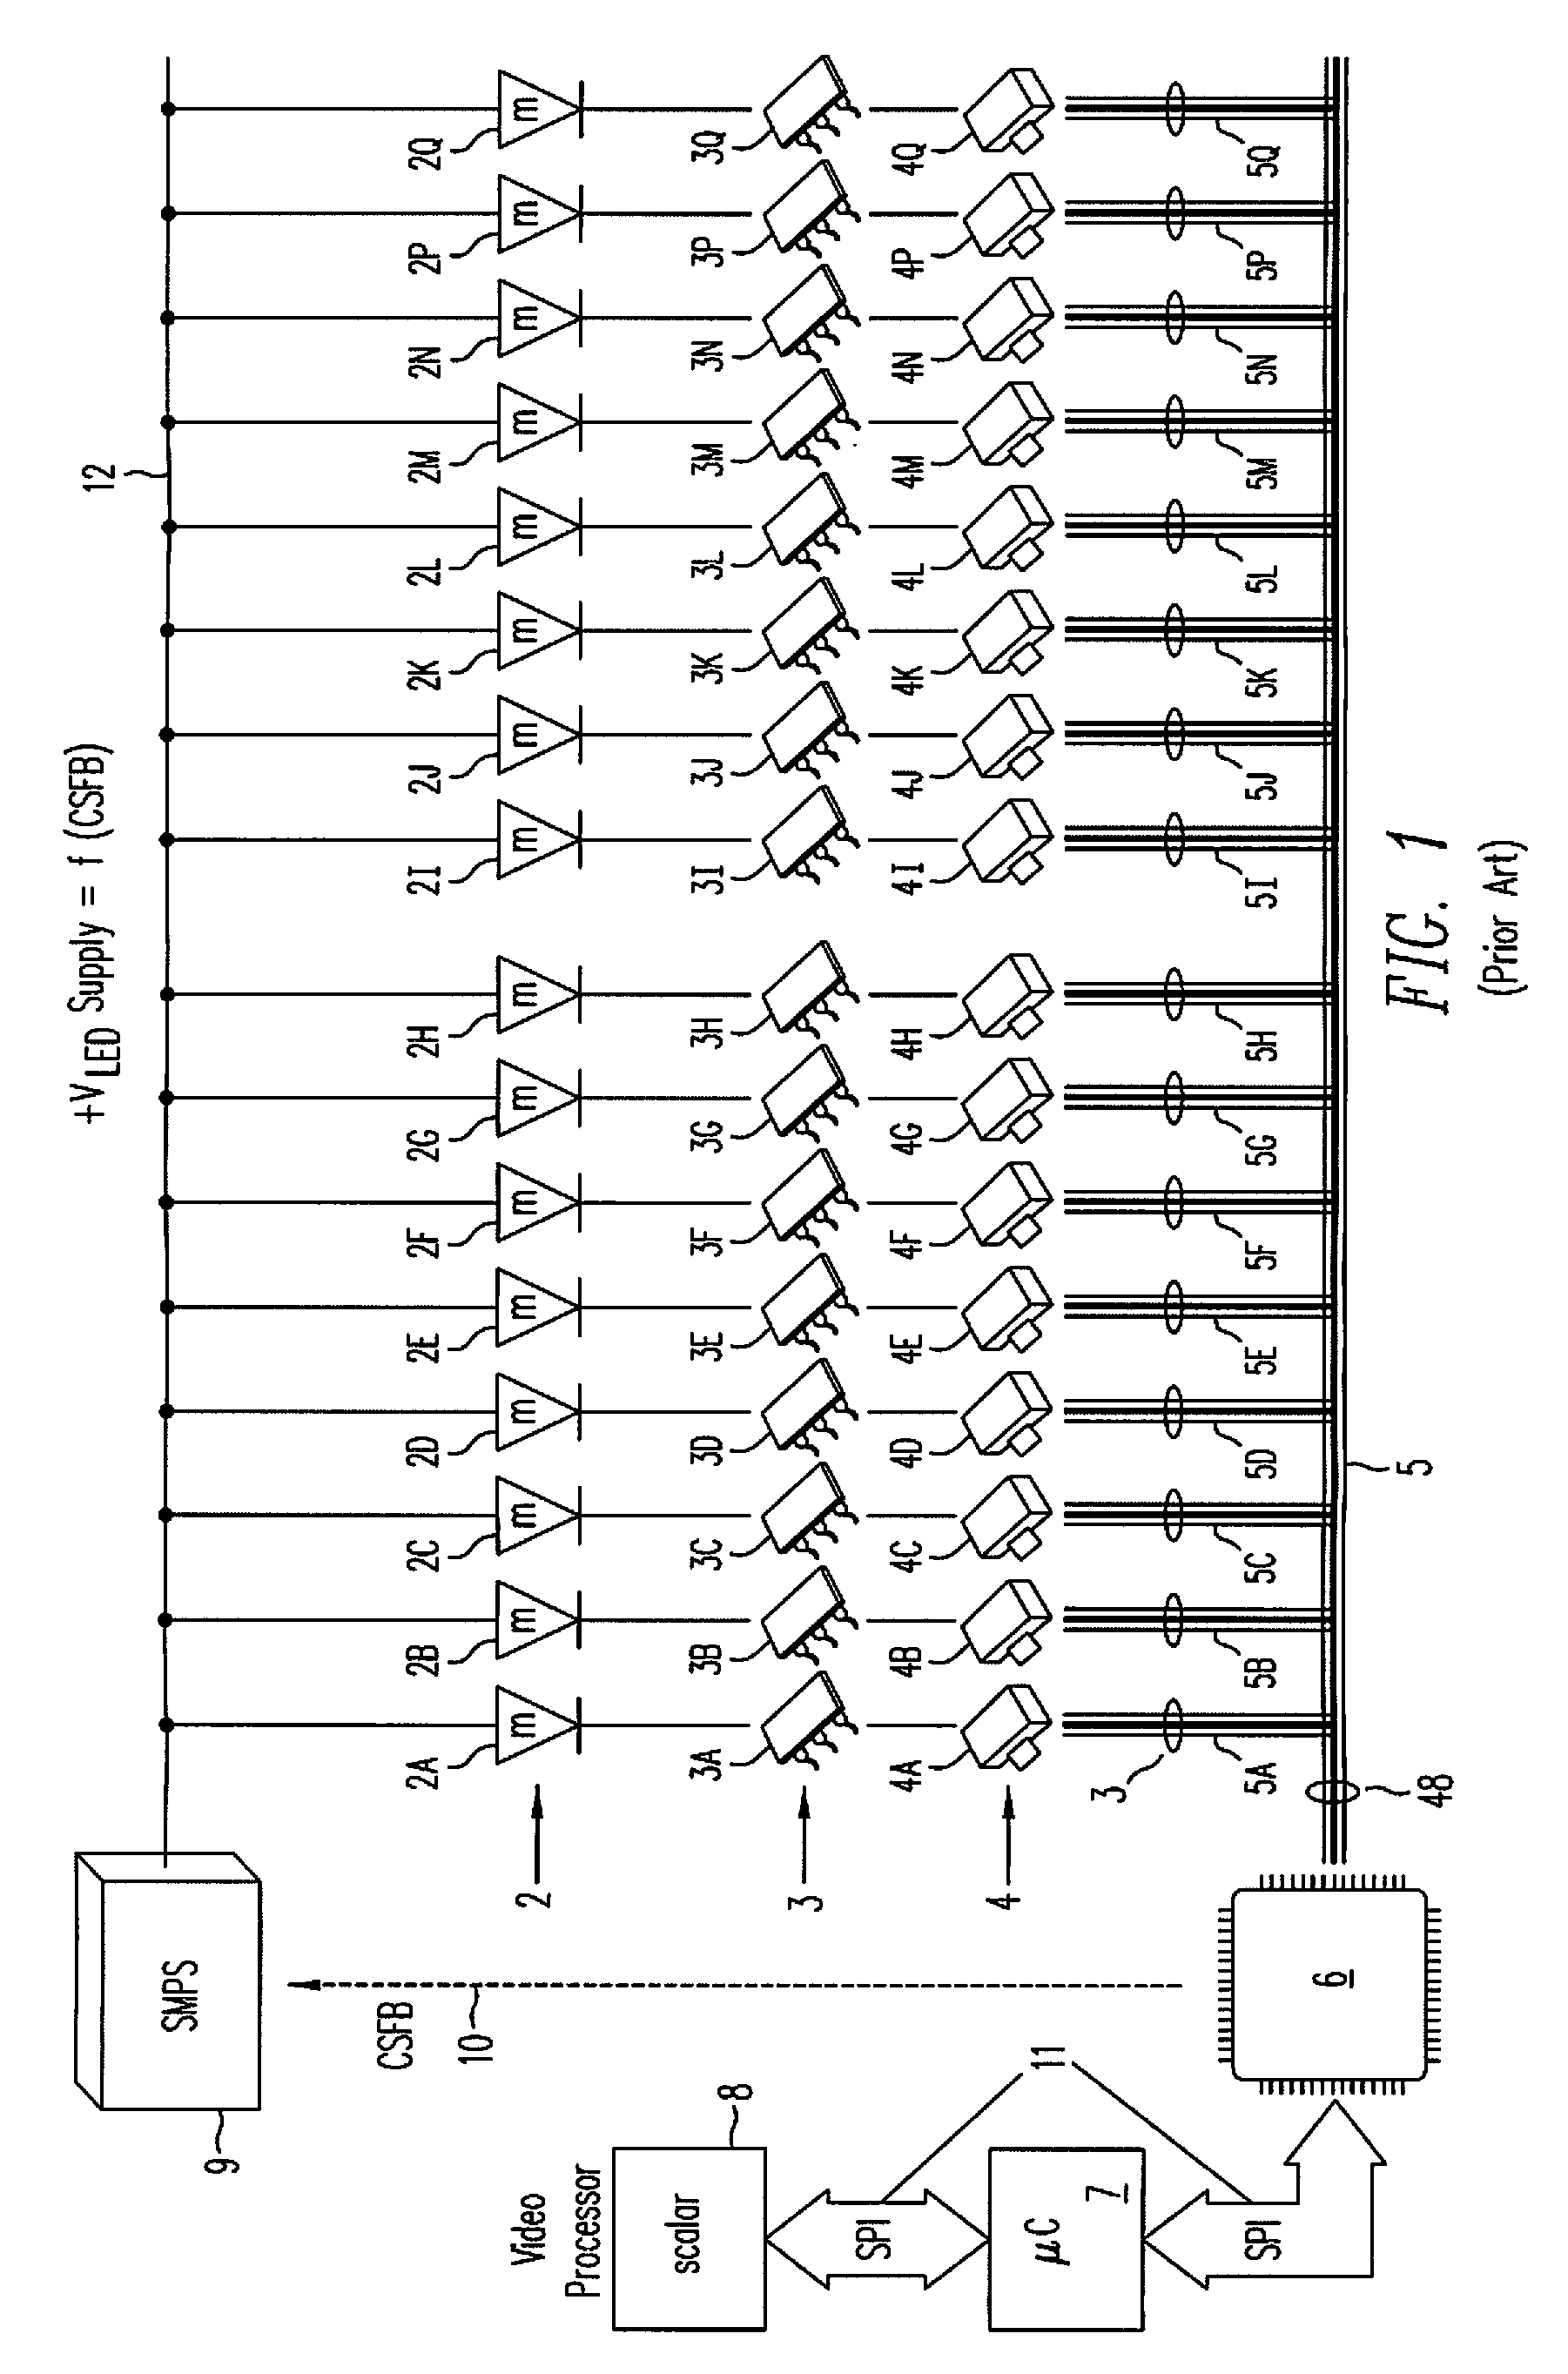 Serial lighting interface with embedded feedback